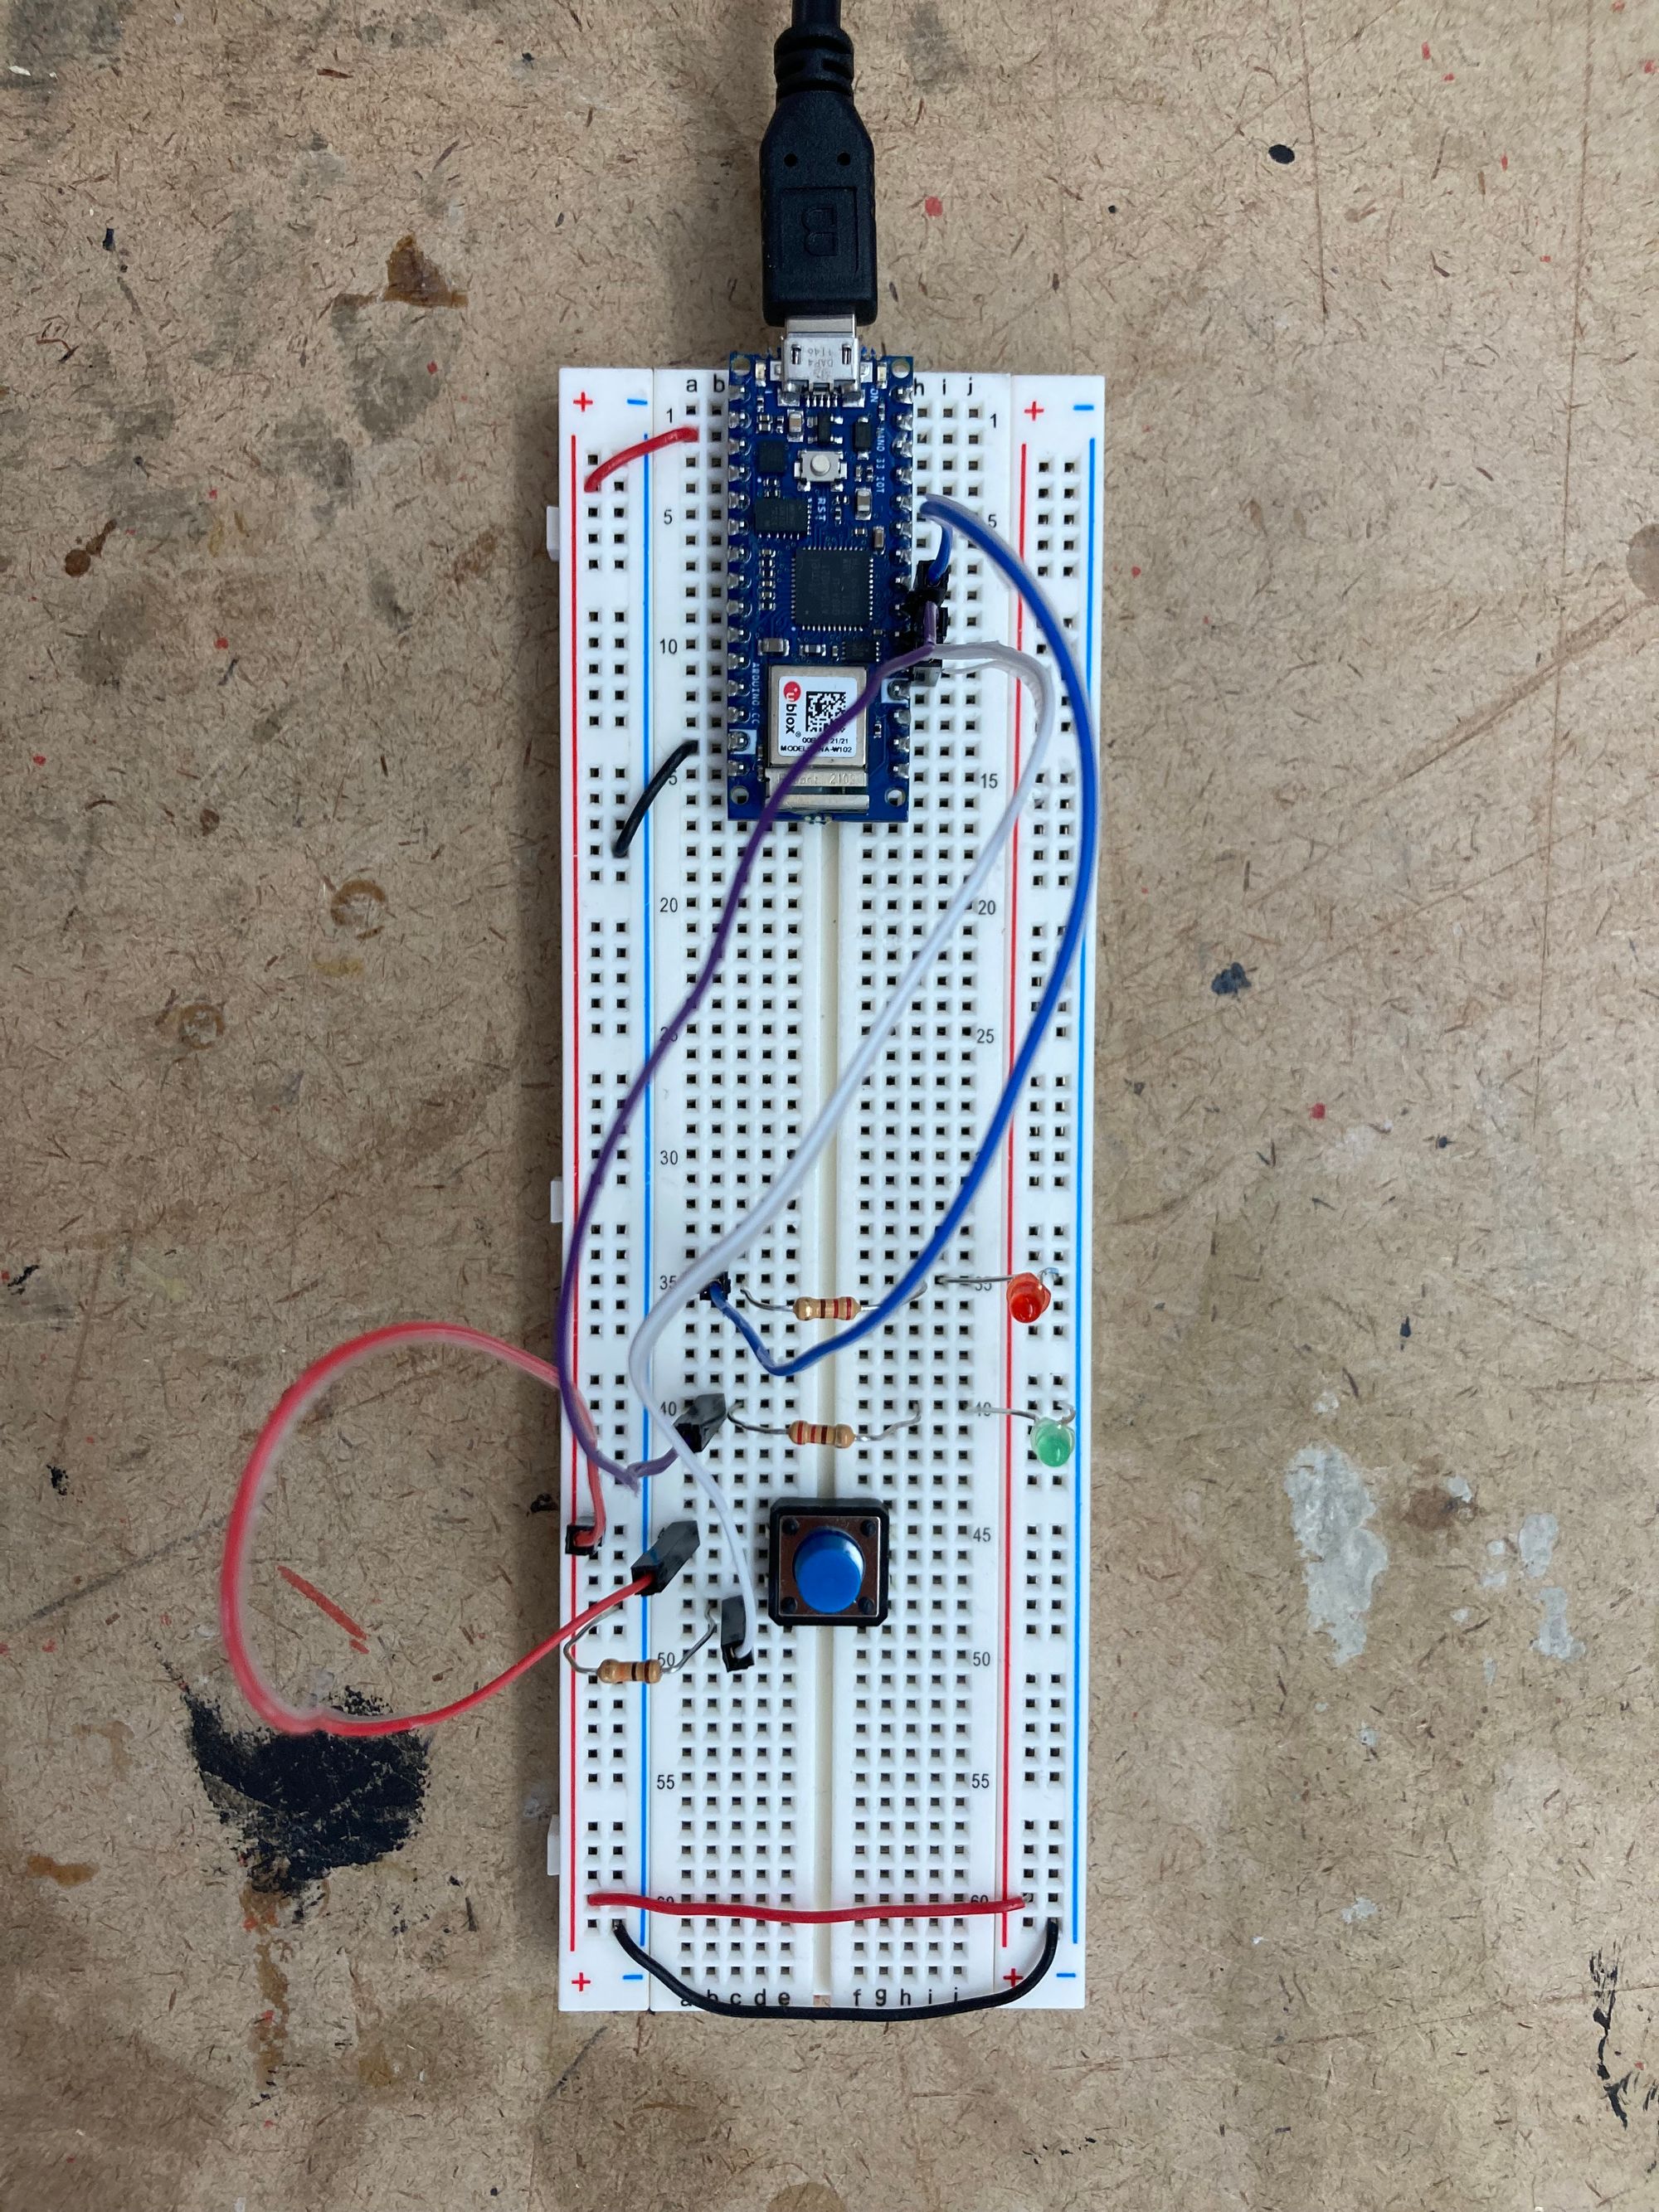 A breadboard set up for the digital inputs lab.